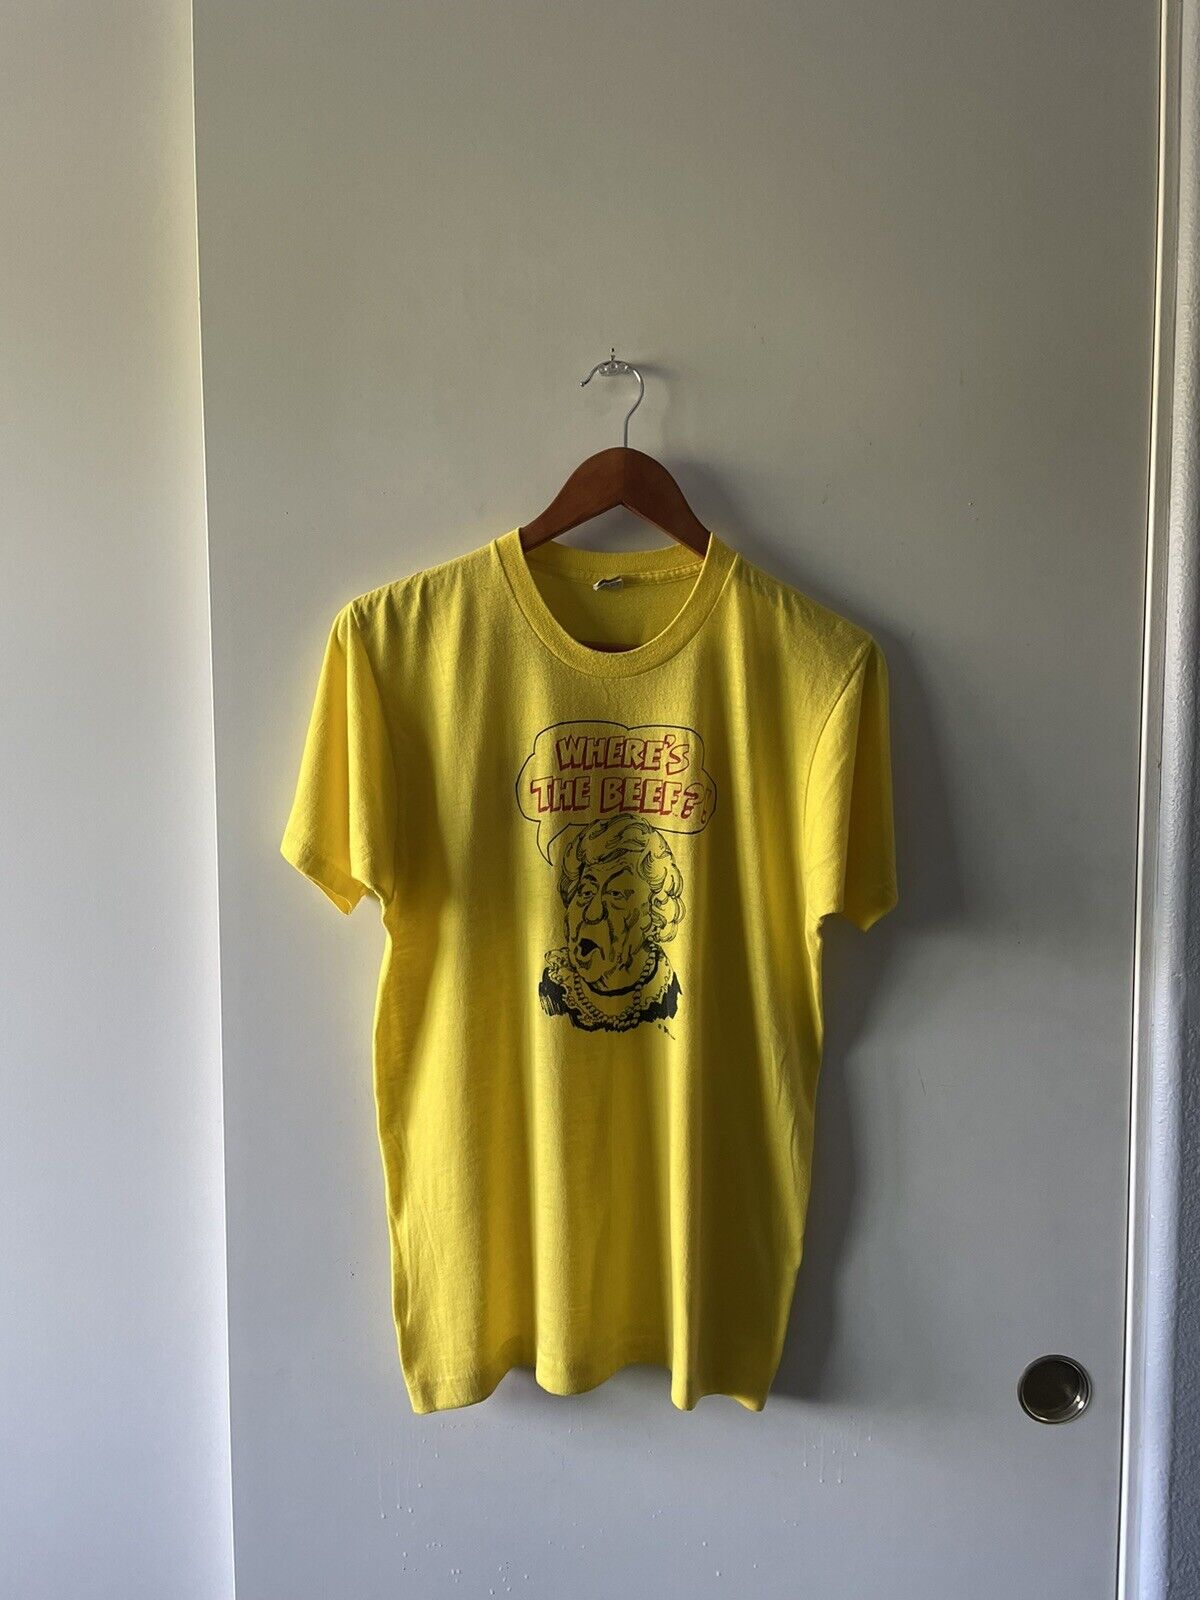 Rare Vintage 1980s Wendy’s “Where’s the Beef?”  Yellow Advertisement Shirt  1984